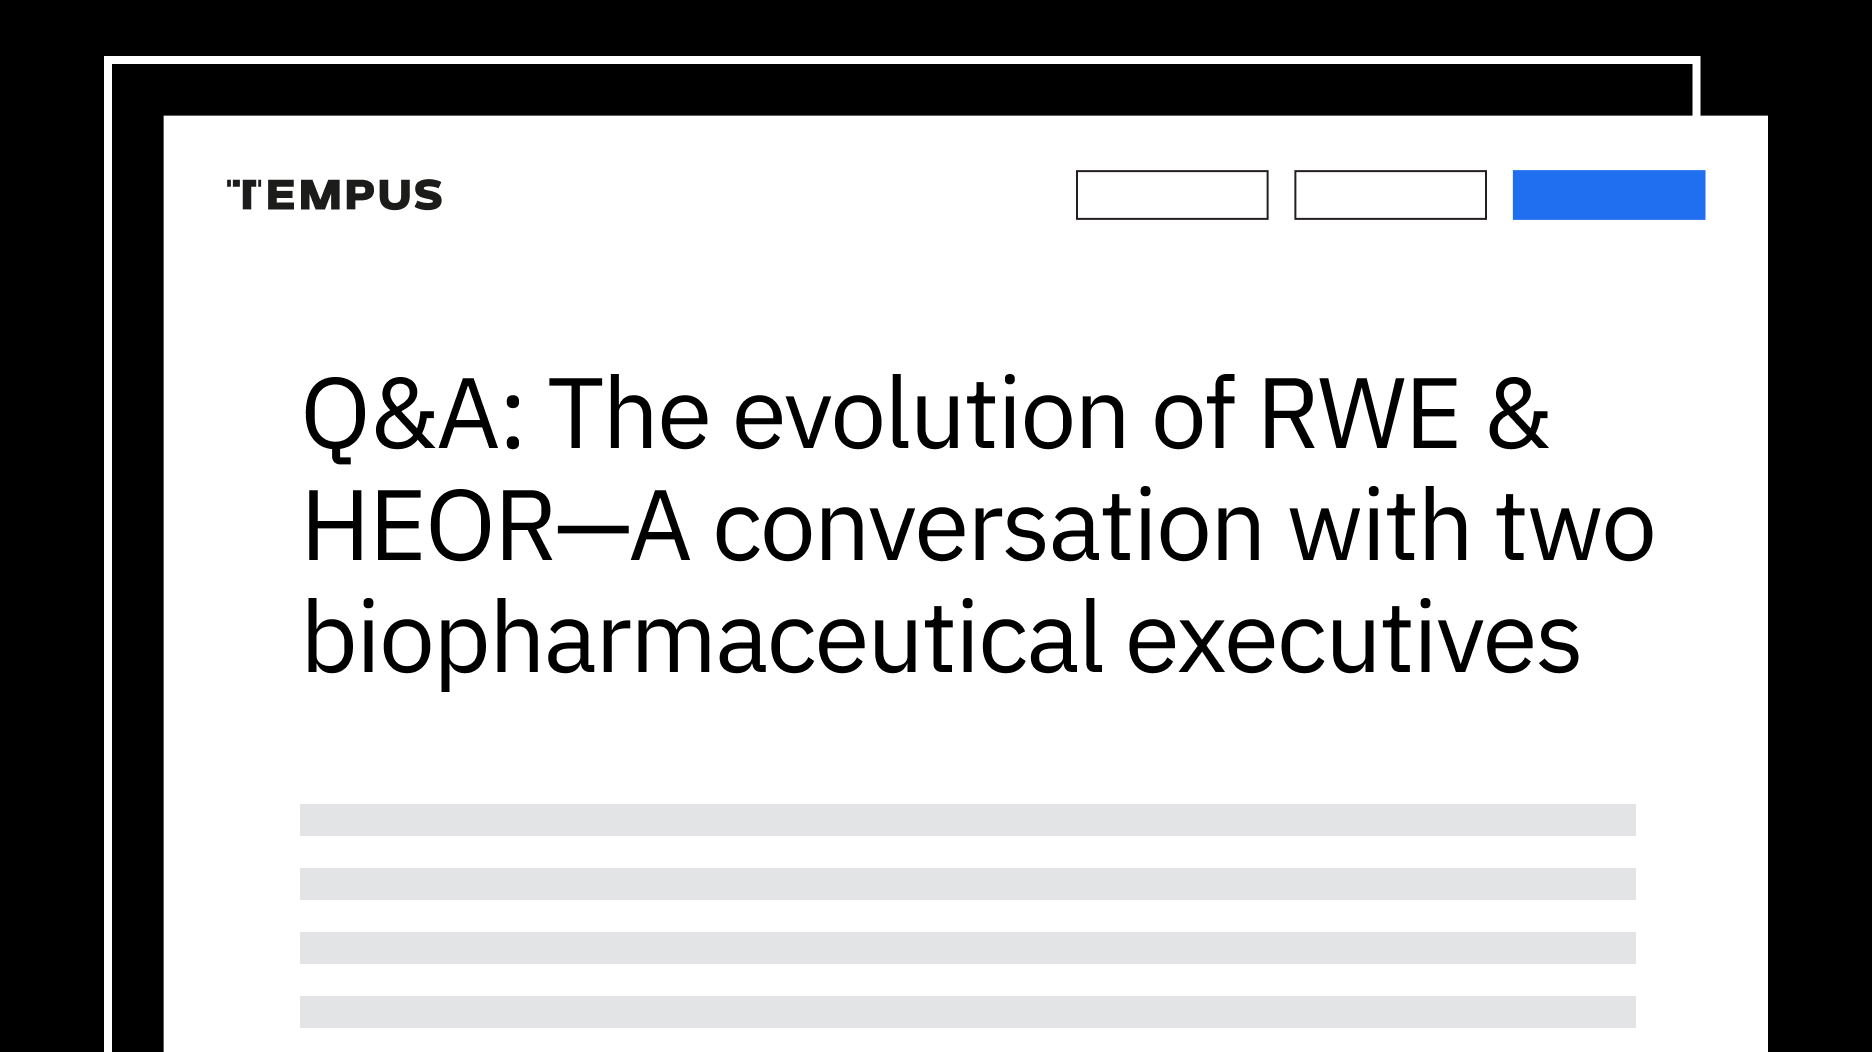 Q&A: The evolution of RWE & HEOR—A conversation with two biopharmaceutical executives